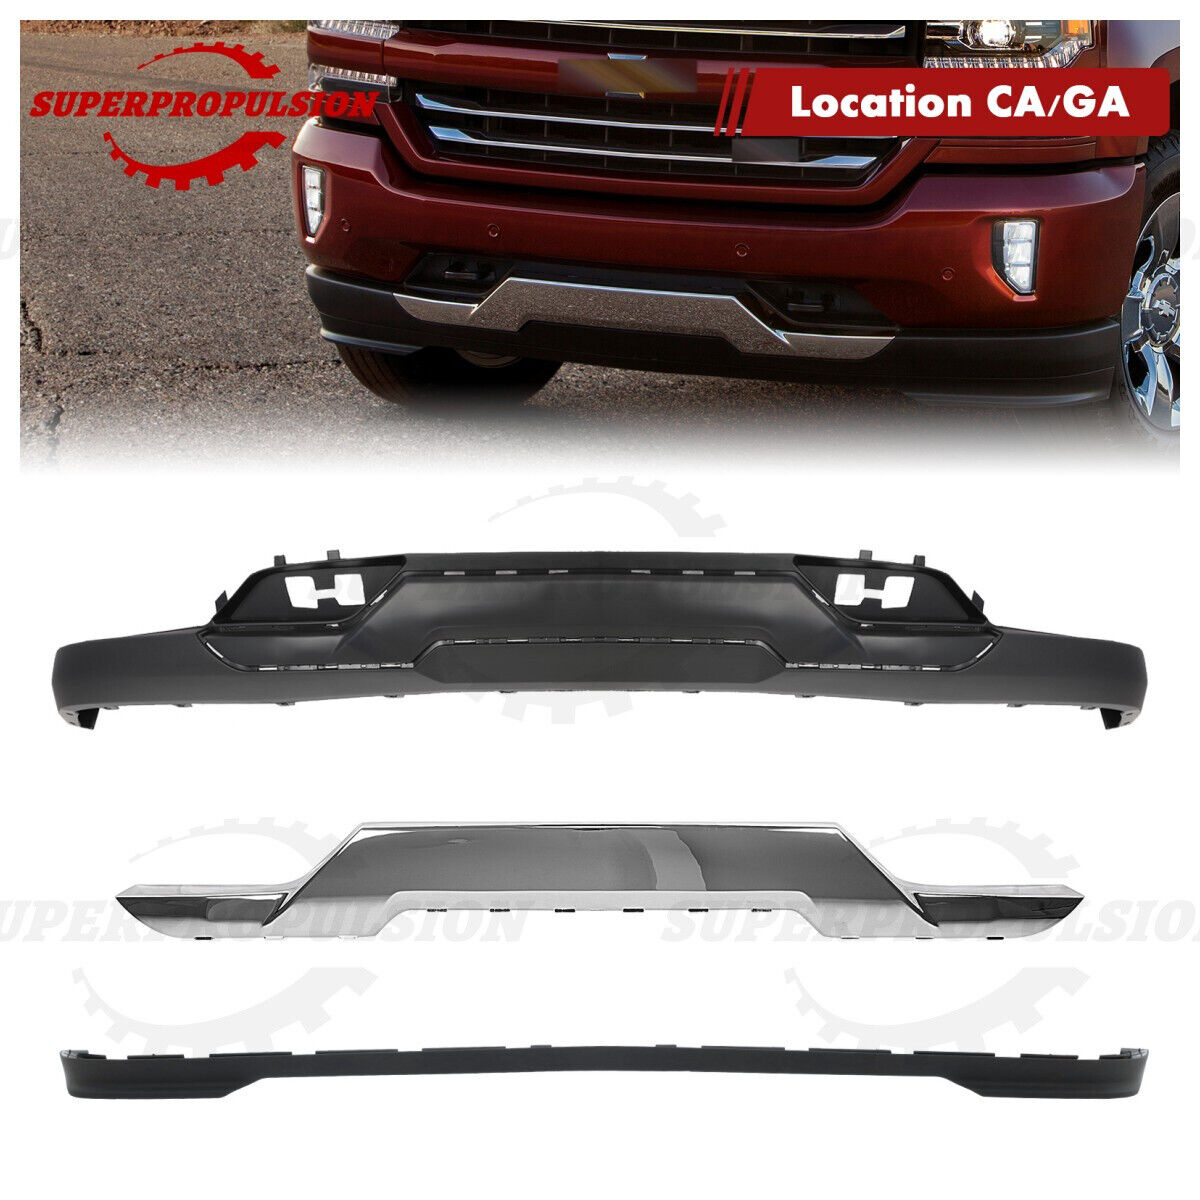 Front Valance With Z71 & Skid Plate &Lower Air Dams For Silverado 1500 2016-2019